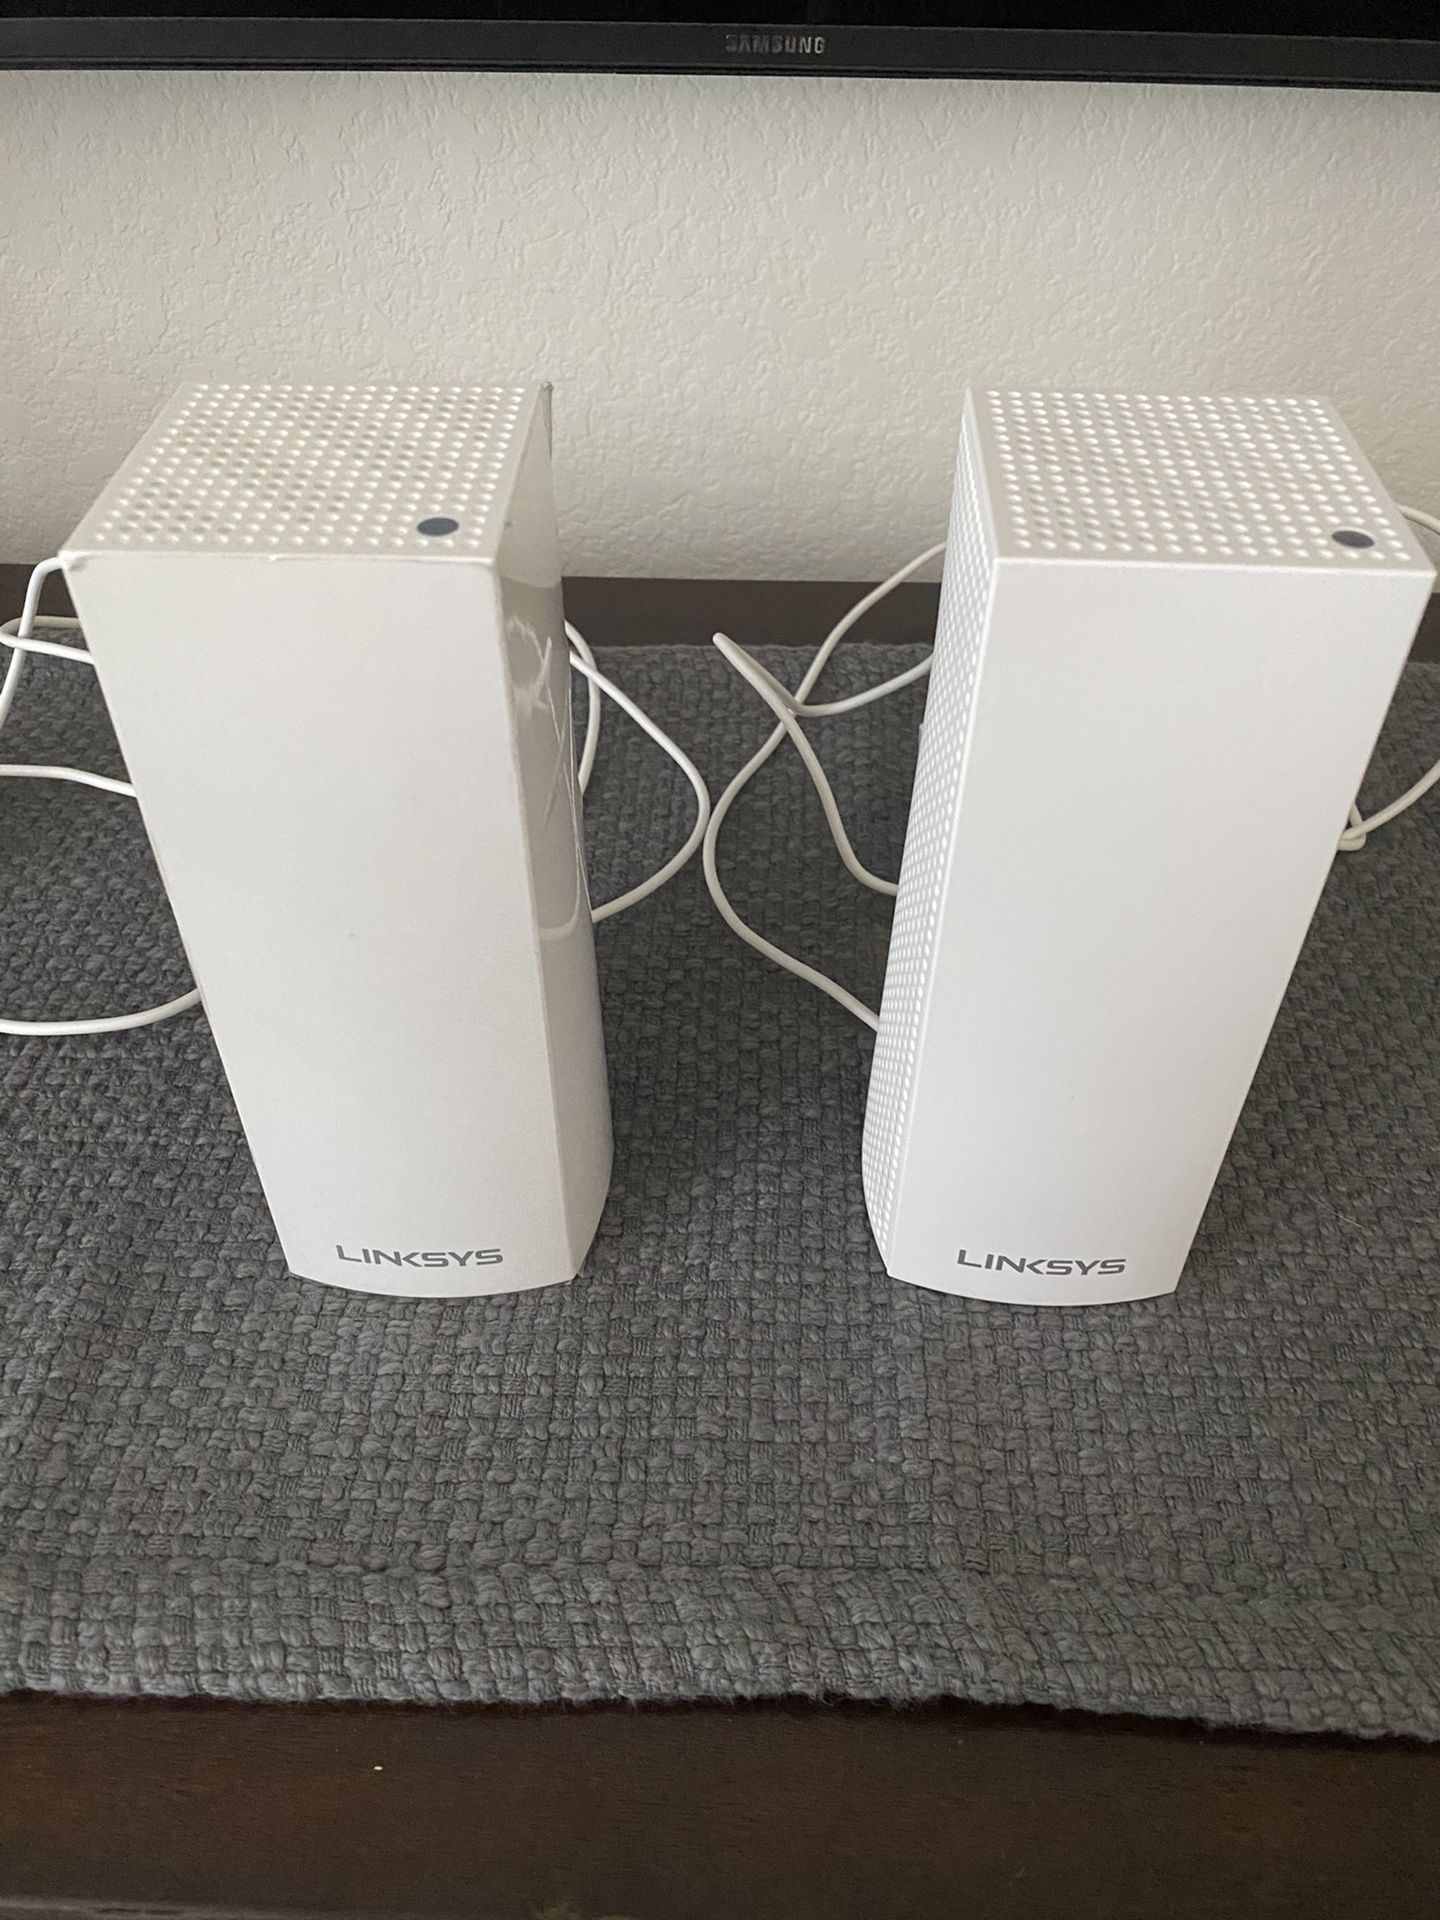 Linksys Velop Mesh WiFi Routers